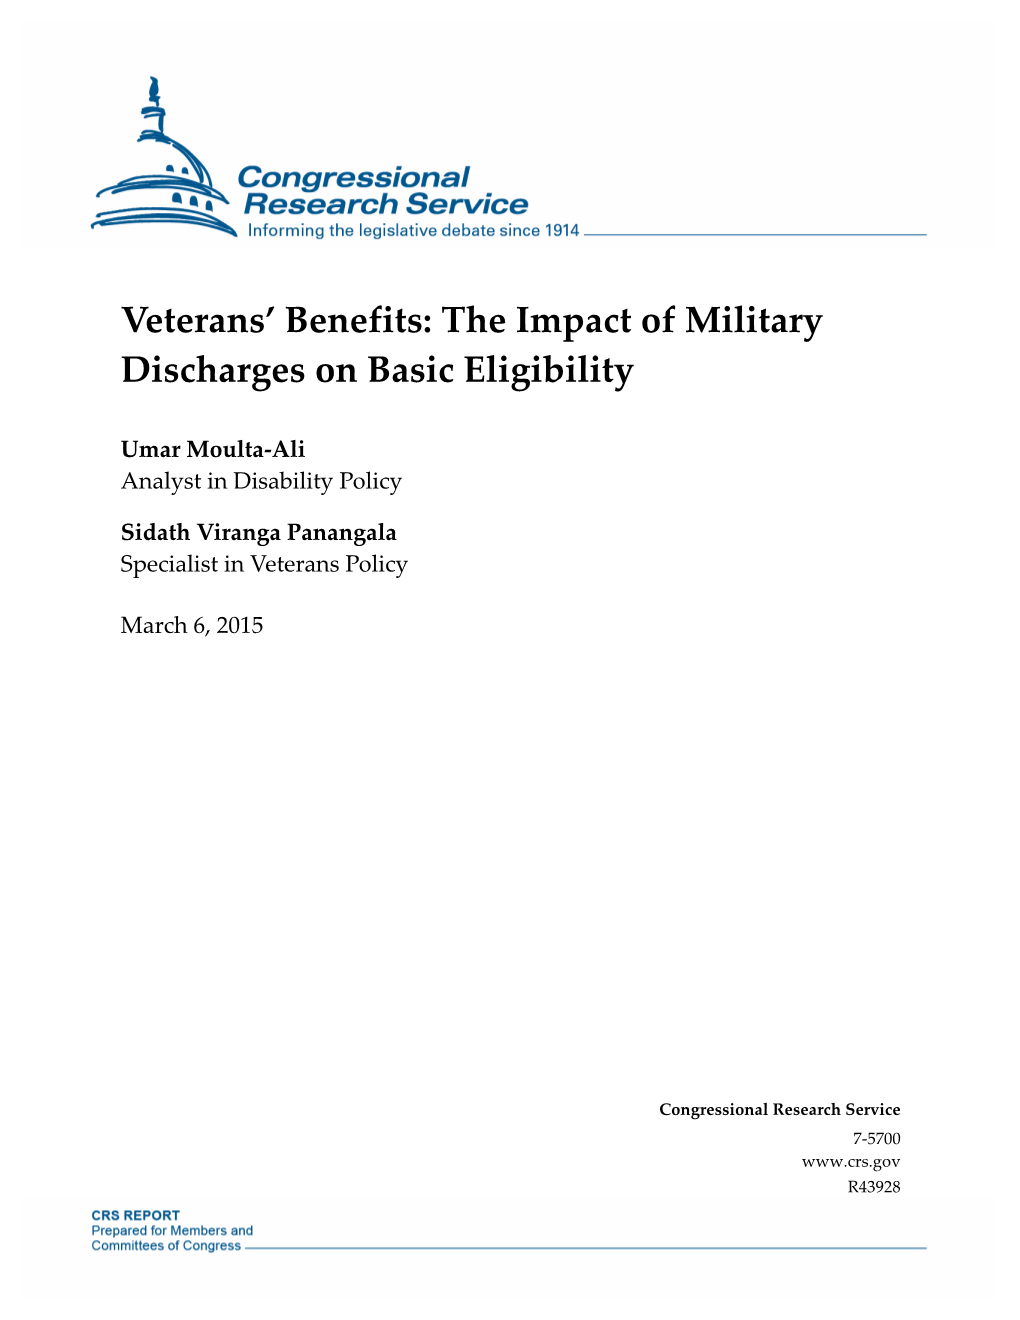 Veterans' Benefits: the Impact of Military Discharges on Basic Eligibility